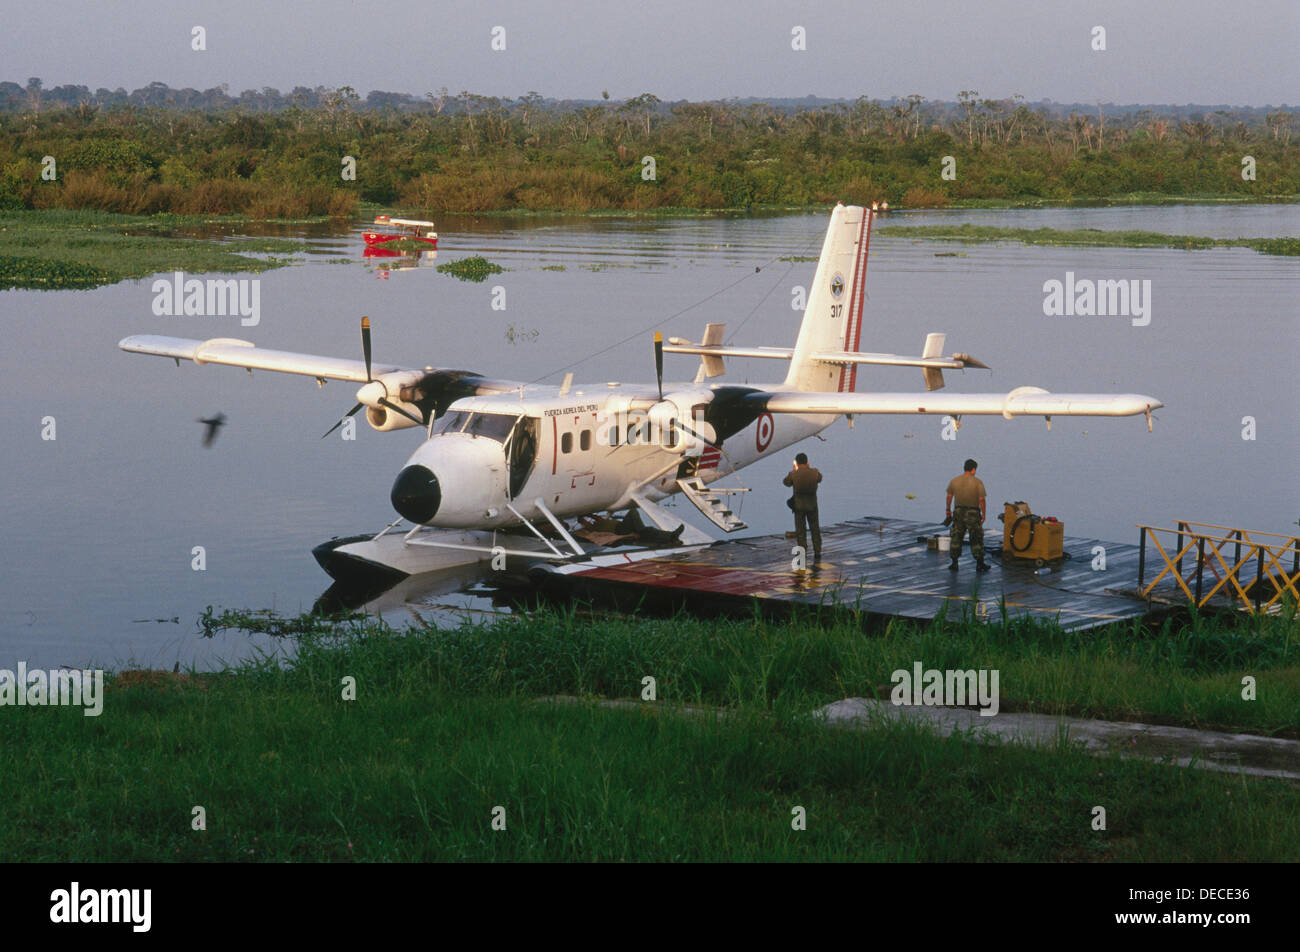 Aircraft that goes to remote places in the jungle. Iquitos, River Amazon. Peru Stock Photo